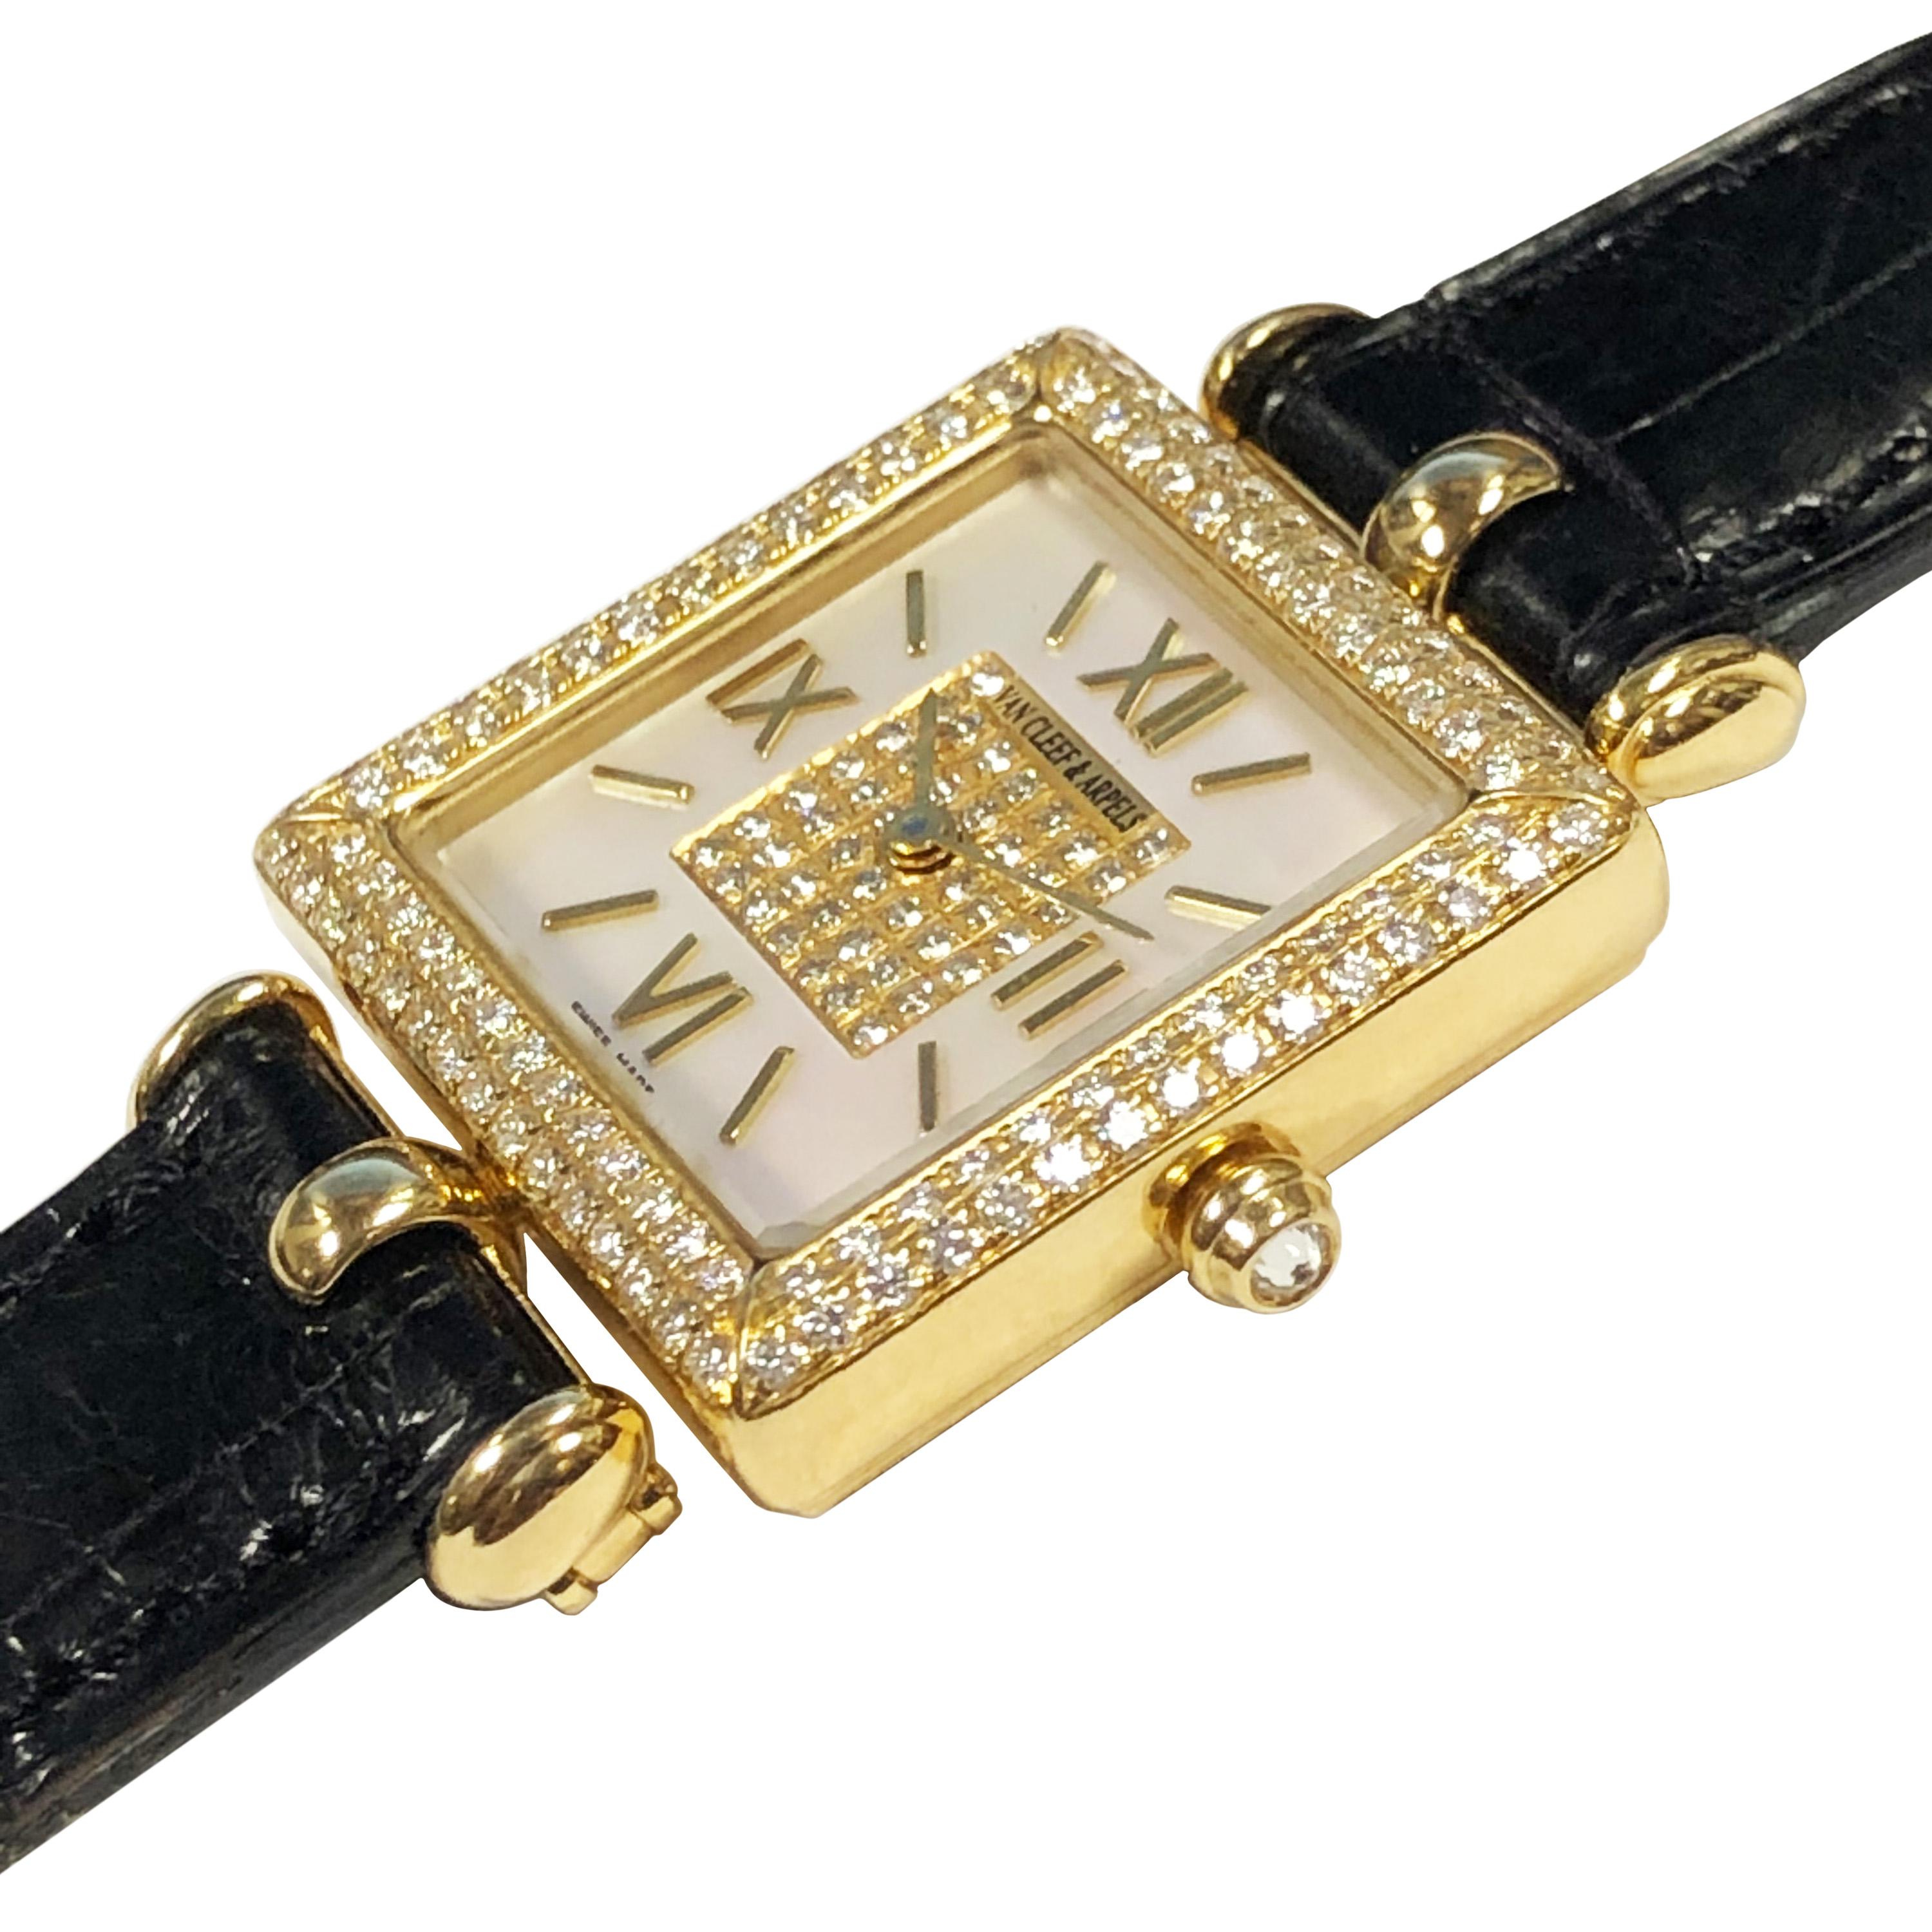 Circa 2010 Van Cleef & Arpels Classique Ladies Wrist Watch, 23 X 23 MM 2 piece 18K Yellow Gold case, Double row Diamond set bezel totaling 1.20 Carats, Diamond set Crown, quartz movement, Mother of Pearl dial with raised Gold Markers and the center